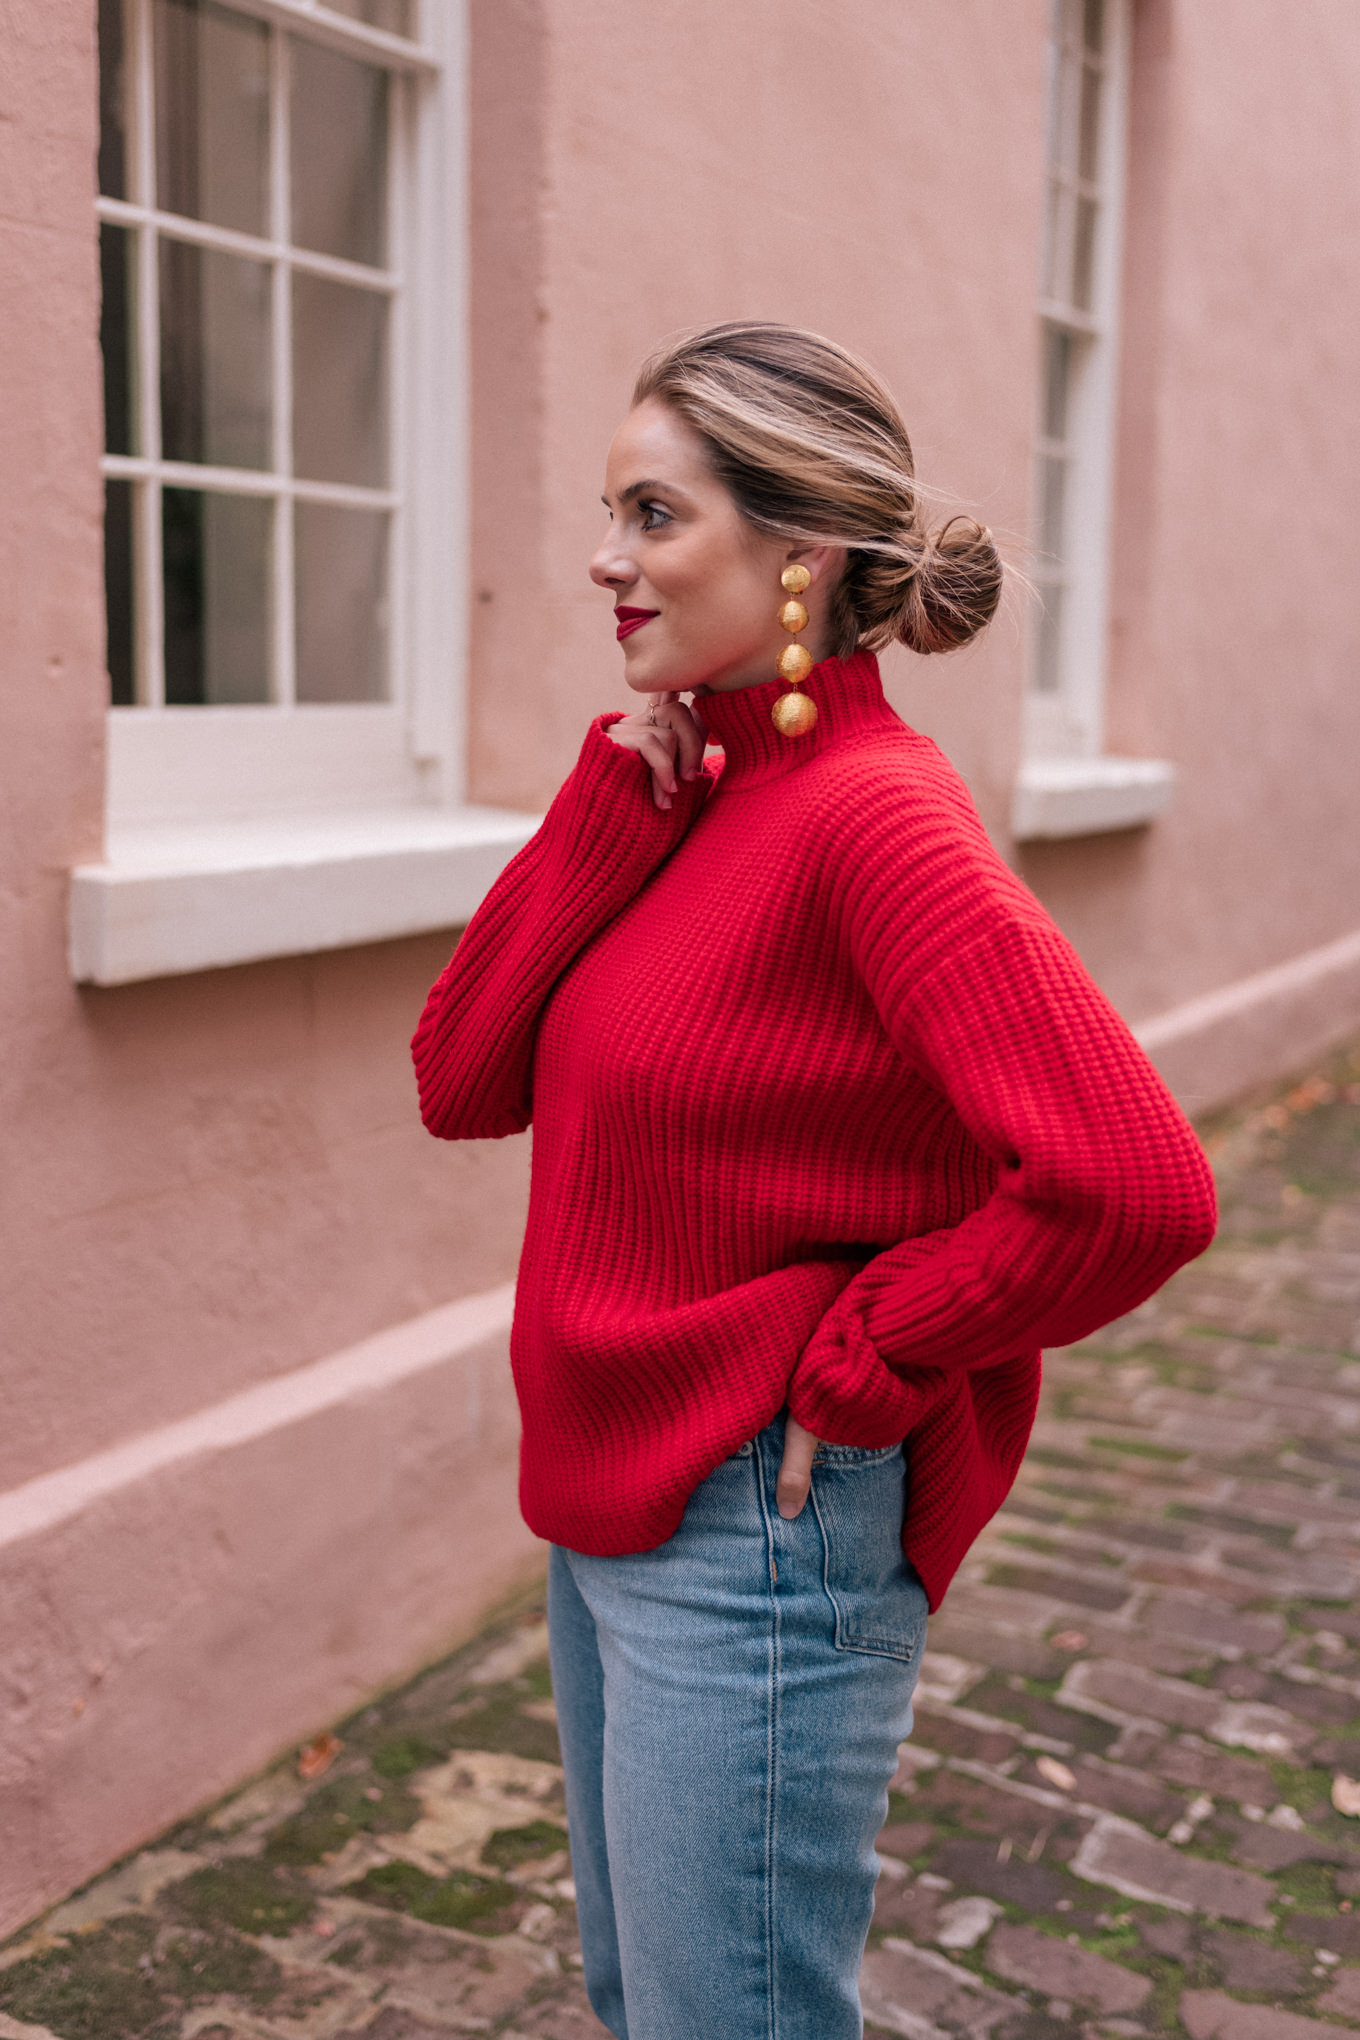 The Perfect Red Holiday Sweater - Julia Berolzheimer